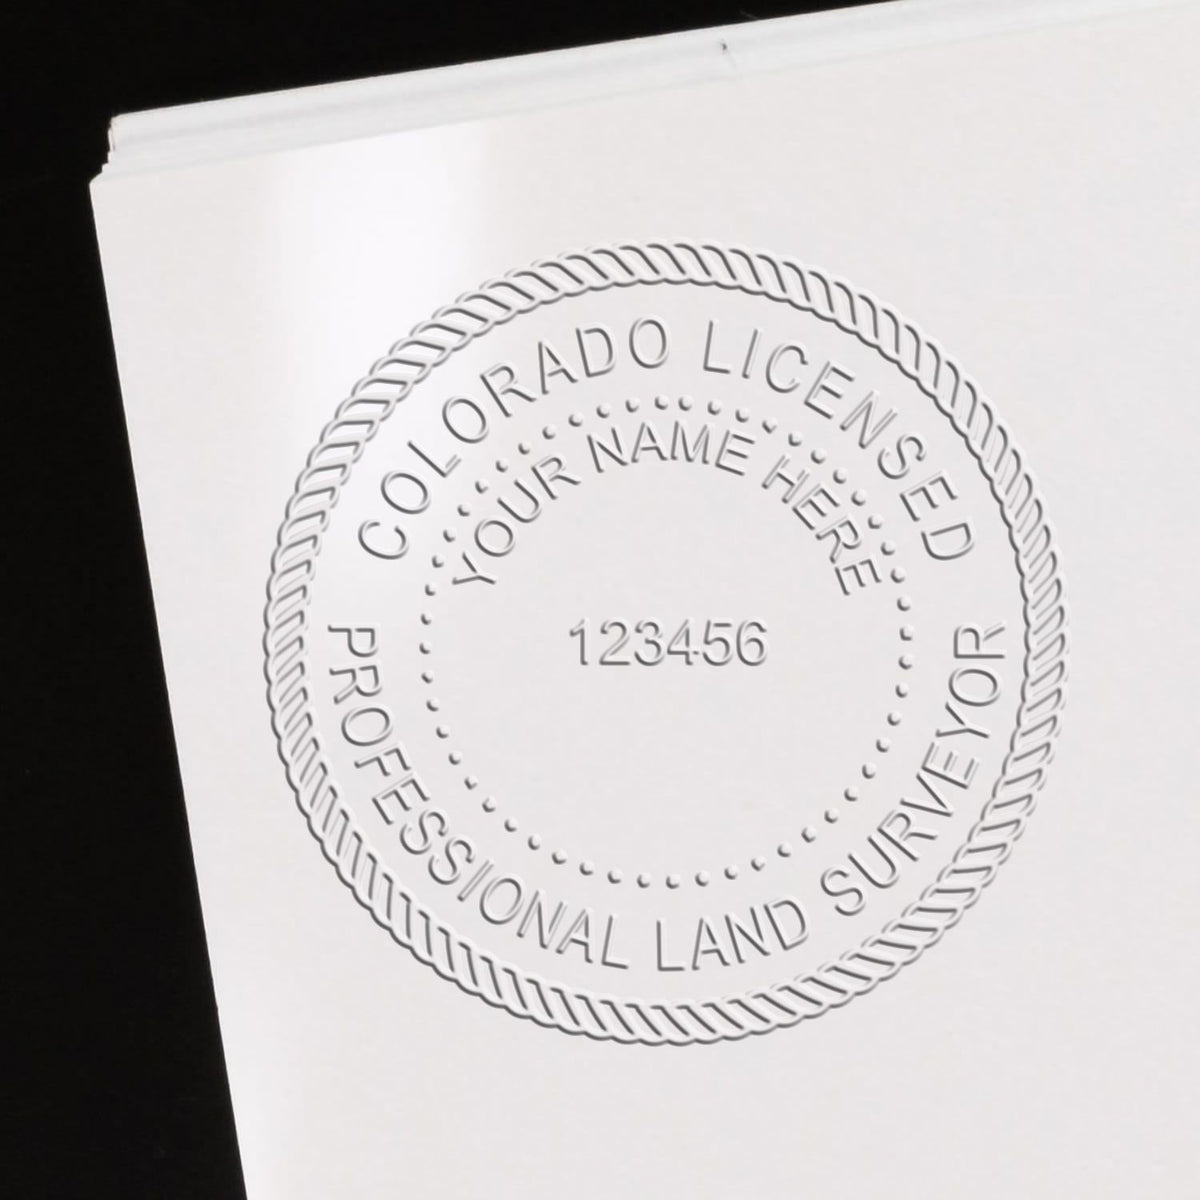 An alternative view of the Heavy Duty Cast Iron Colorado Land Surveyor Seal Embosser stamped on a sheet of paper showing the image in use